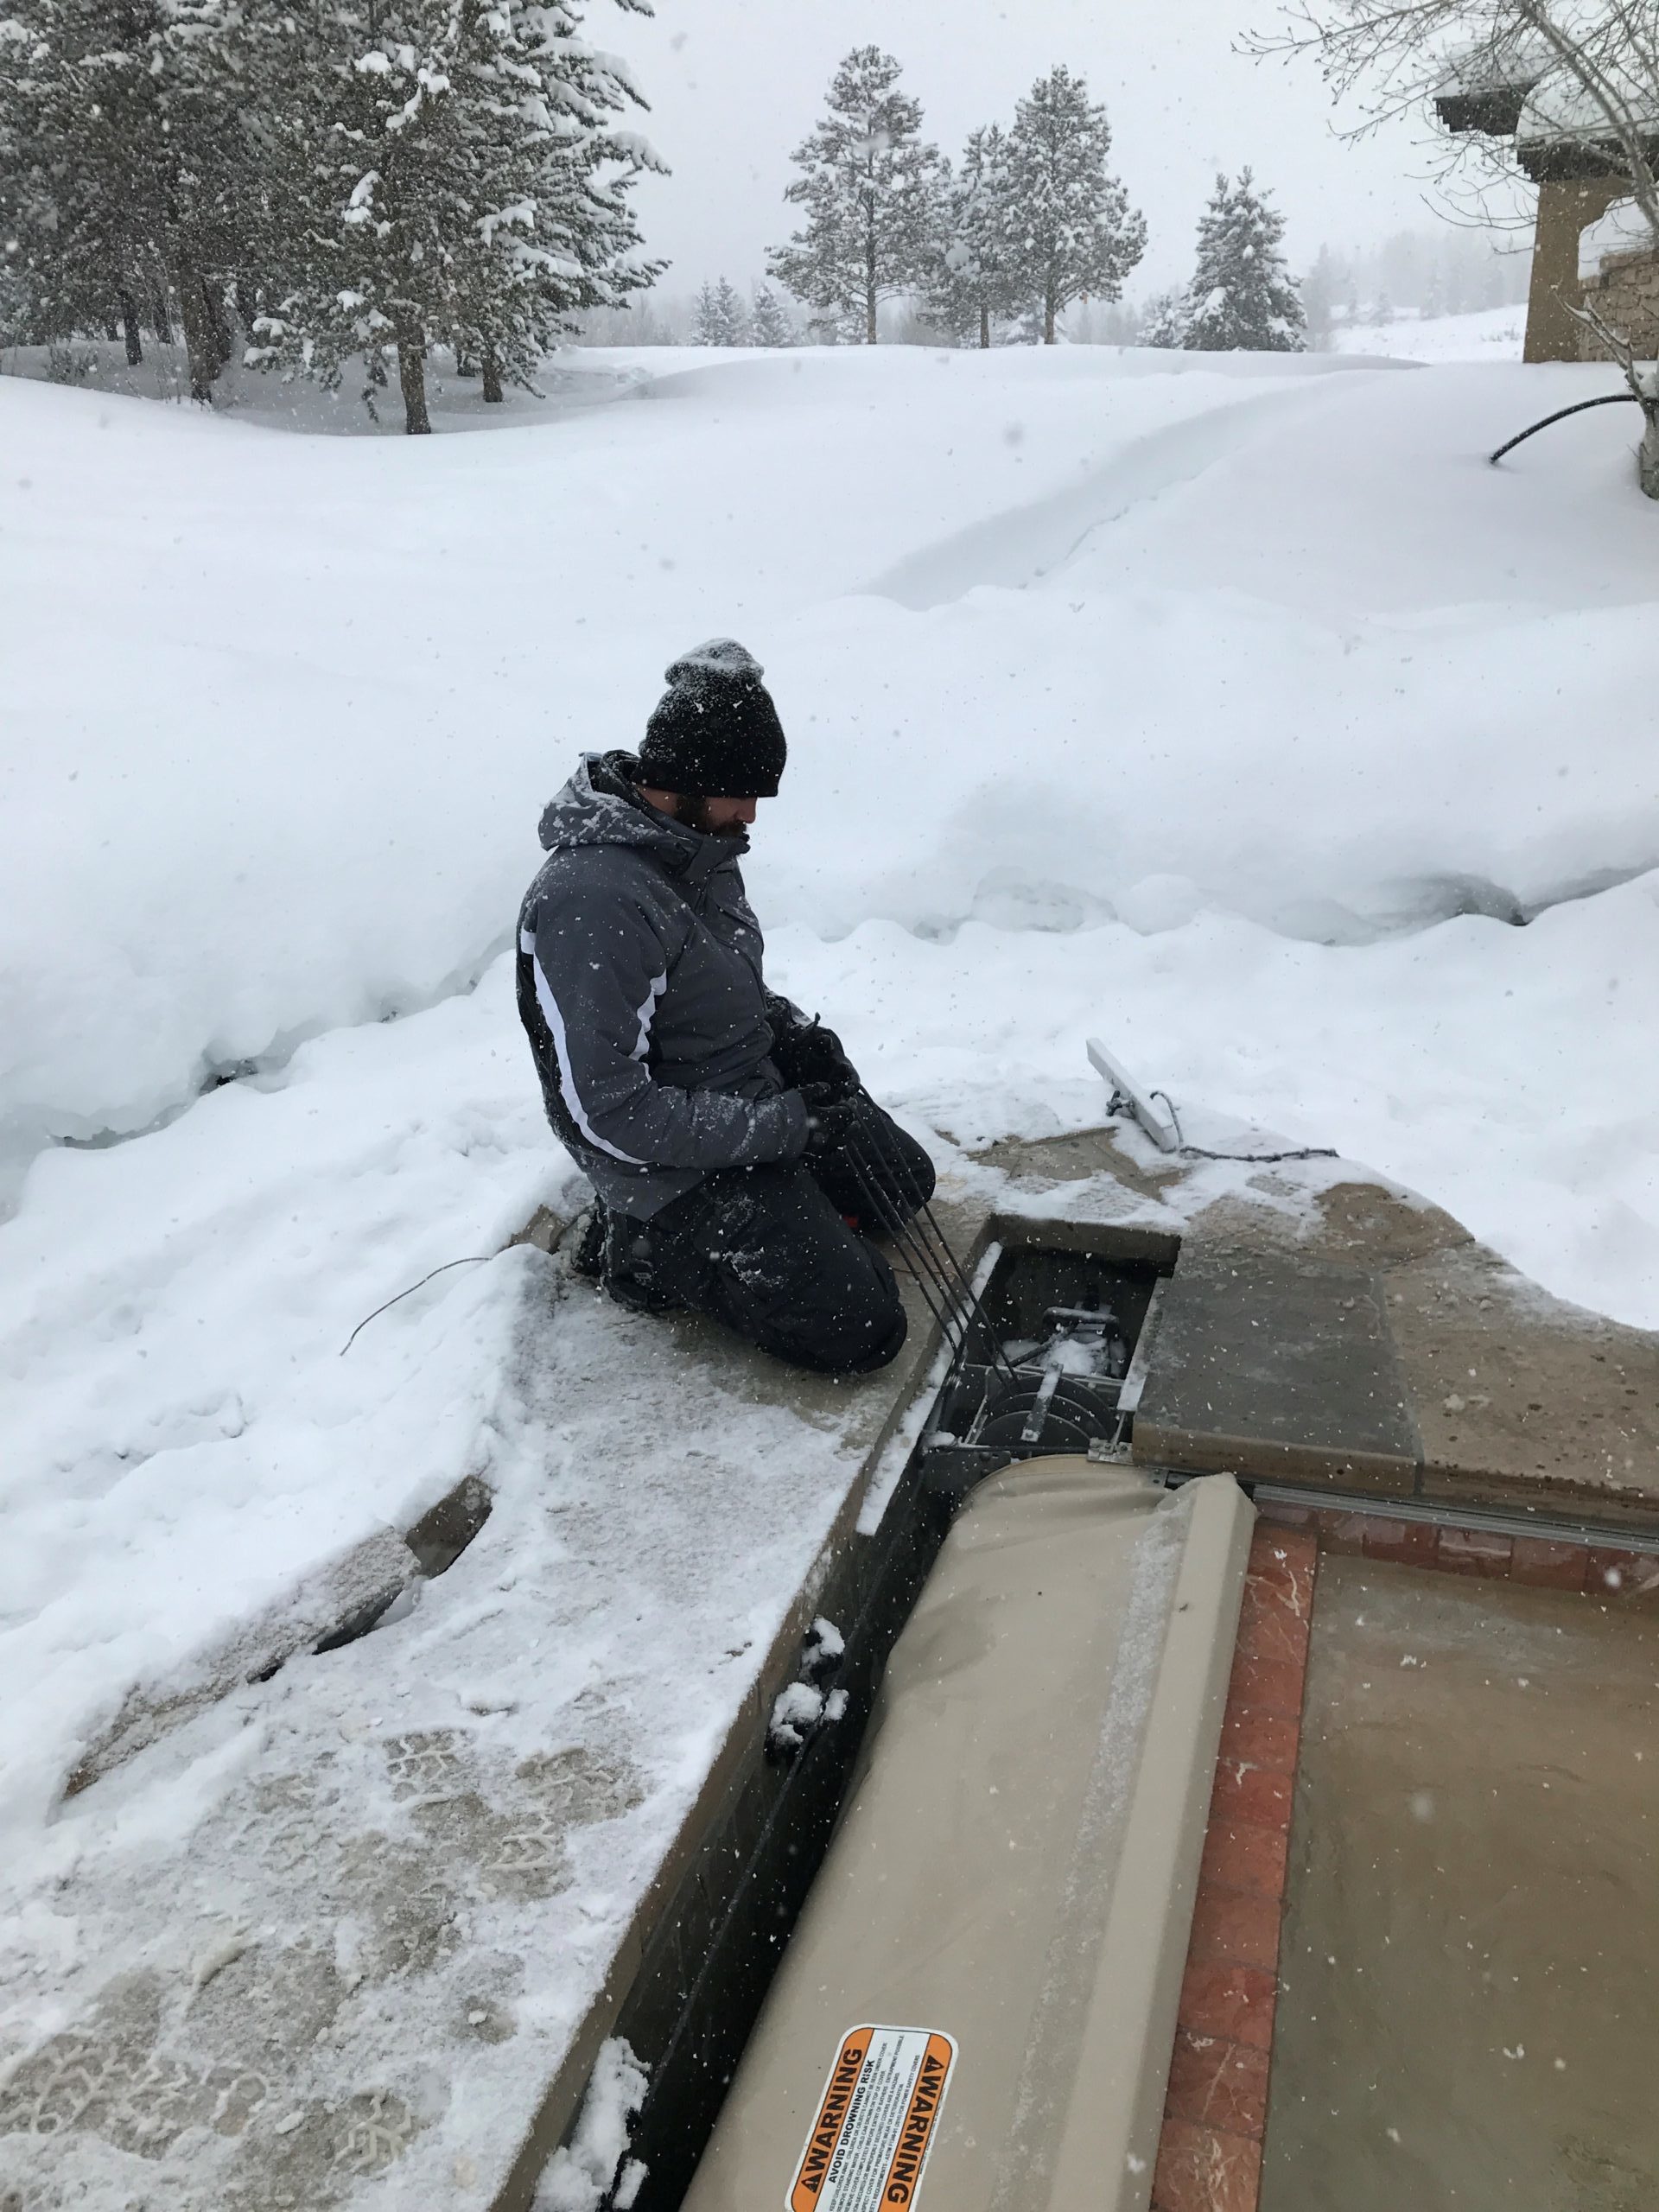 https://poolsafe.com/wp-content/uploads/Keith-Install-Snow-scaled-e1581713384931.jpeg